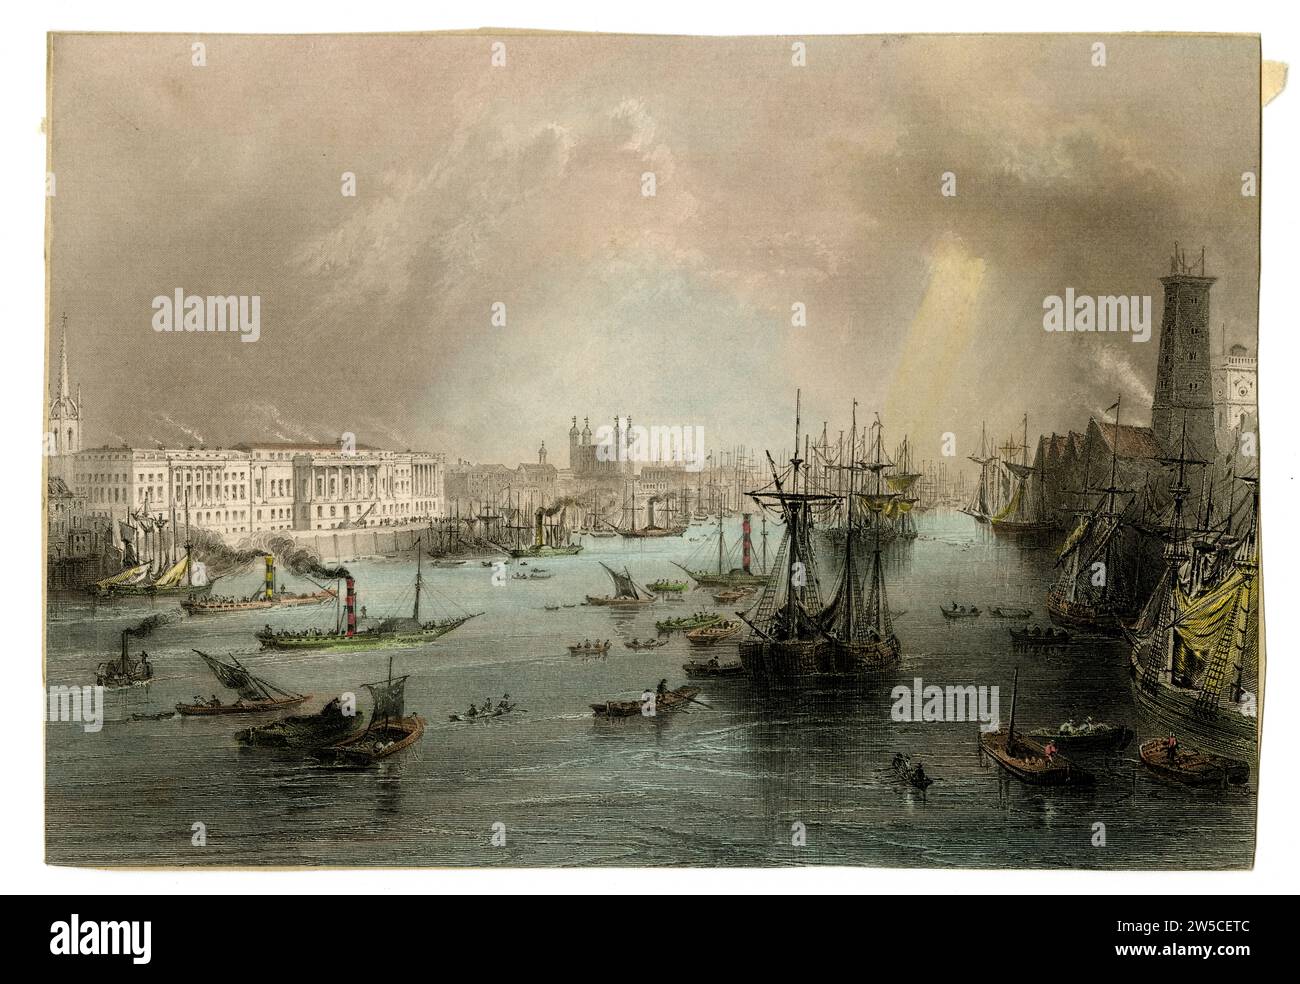 Coloured steel engraving of the Pool of London, including the Tower of London from the south-west, mid-19th century, Britain Stock Photo